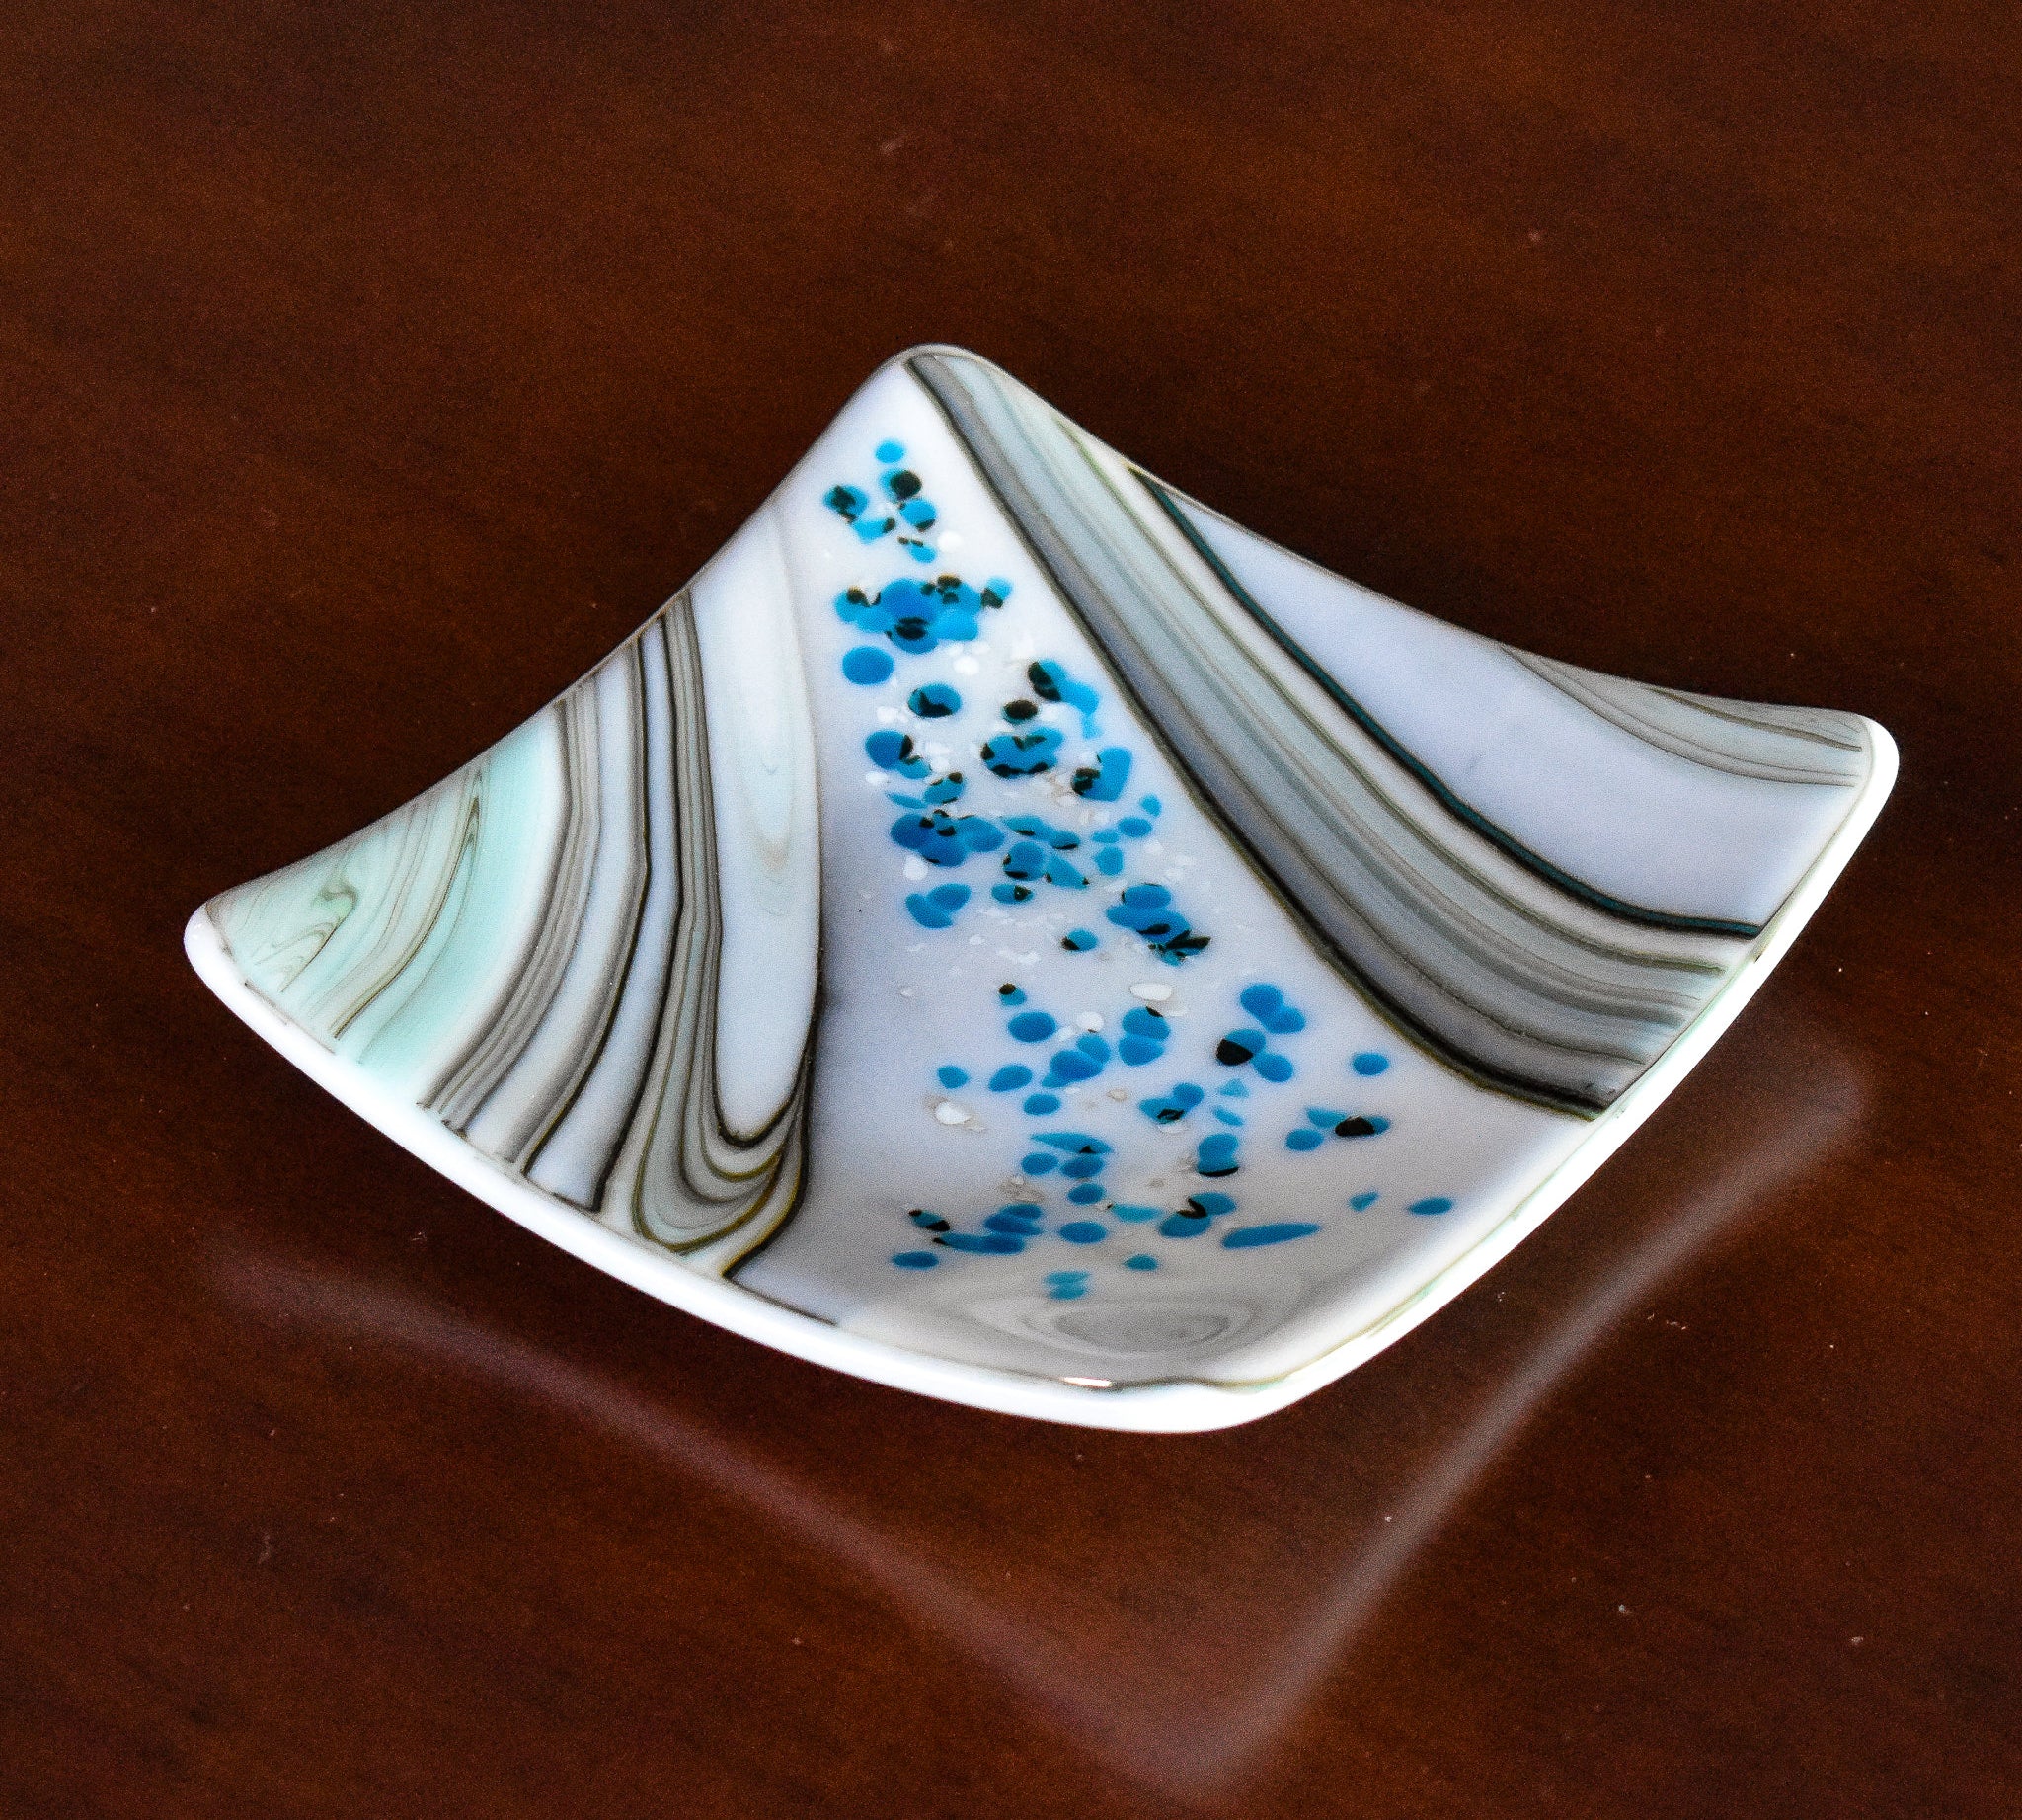 6&quot; square fused glass dish with swirl pattern and small flecks of white and blue glass, sitting on wood table